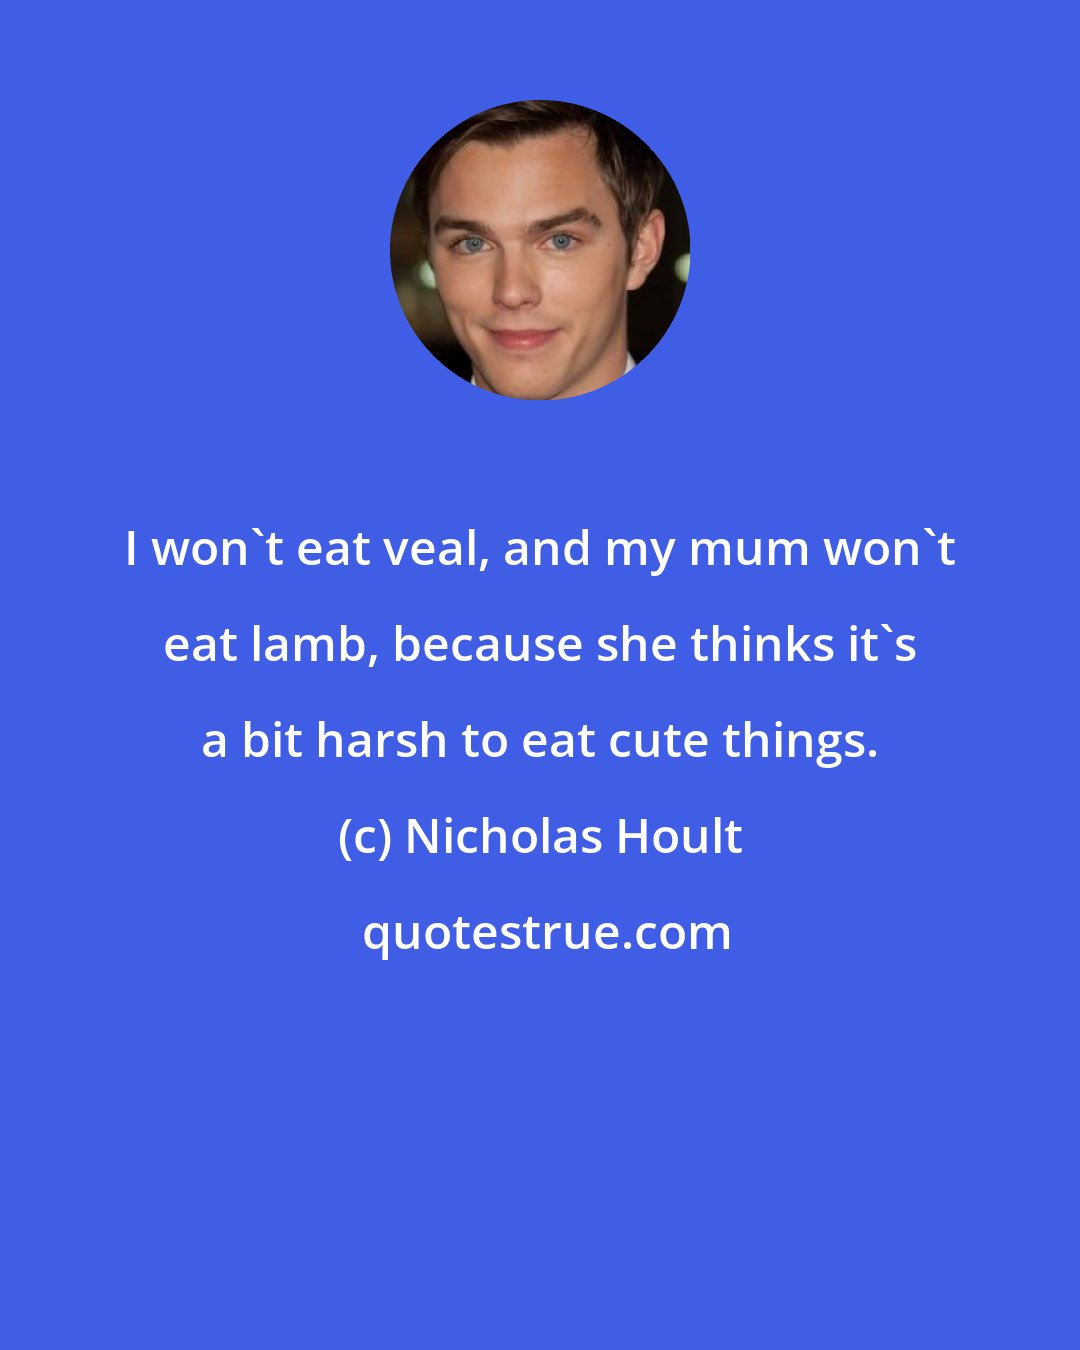 Nicholas Hoult: I won't eat veal, and my mum won't eat lamb, because she thinks it's a bit harsh to eat cute things.